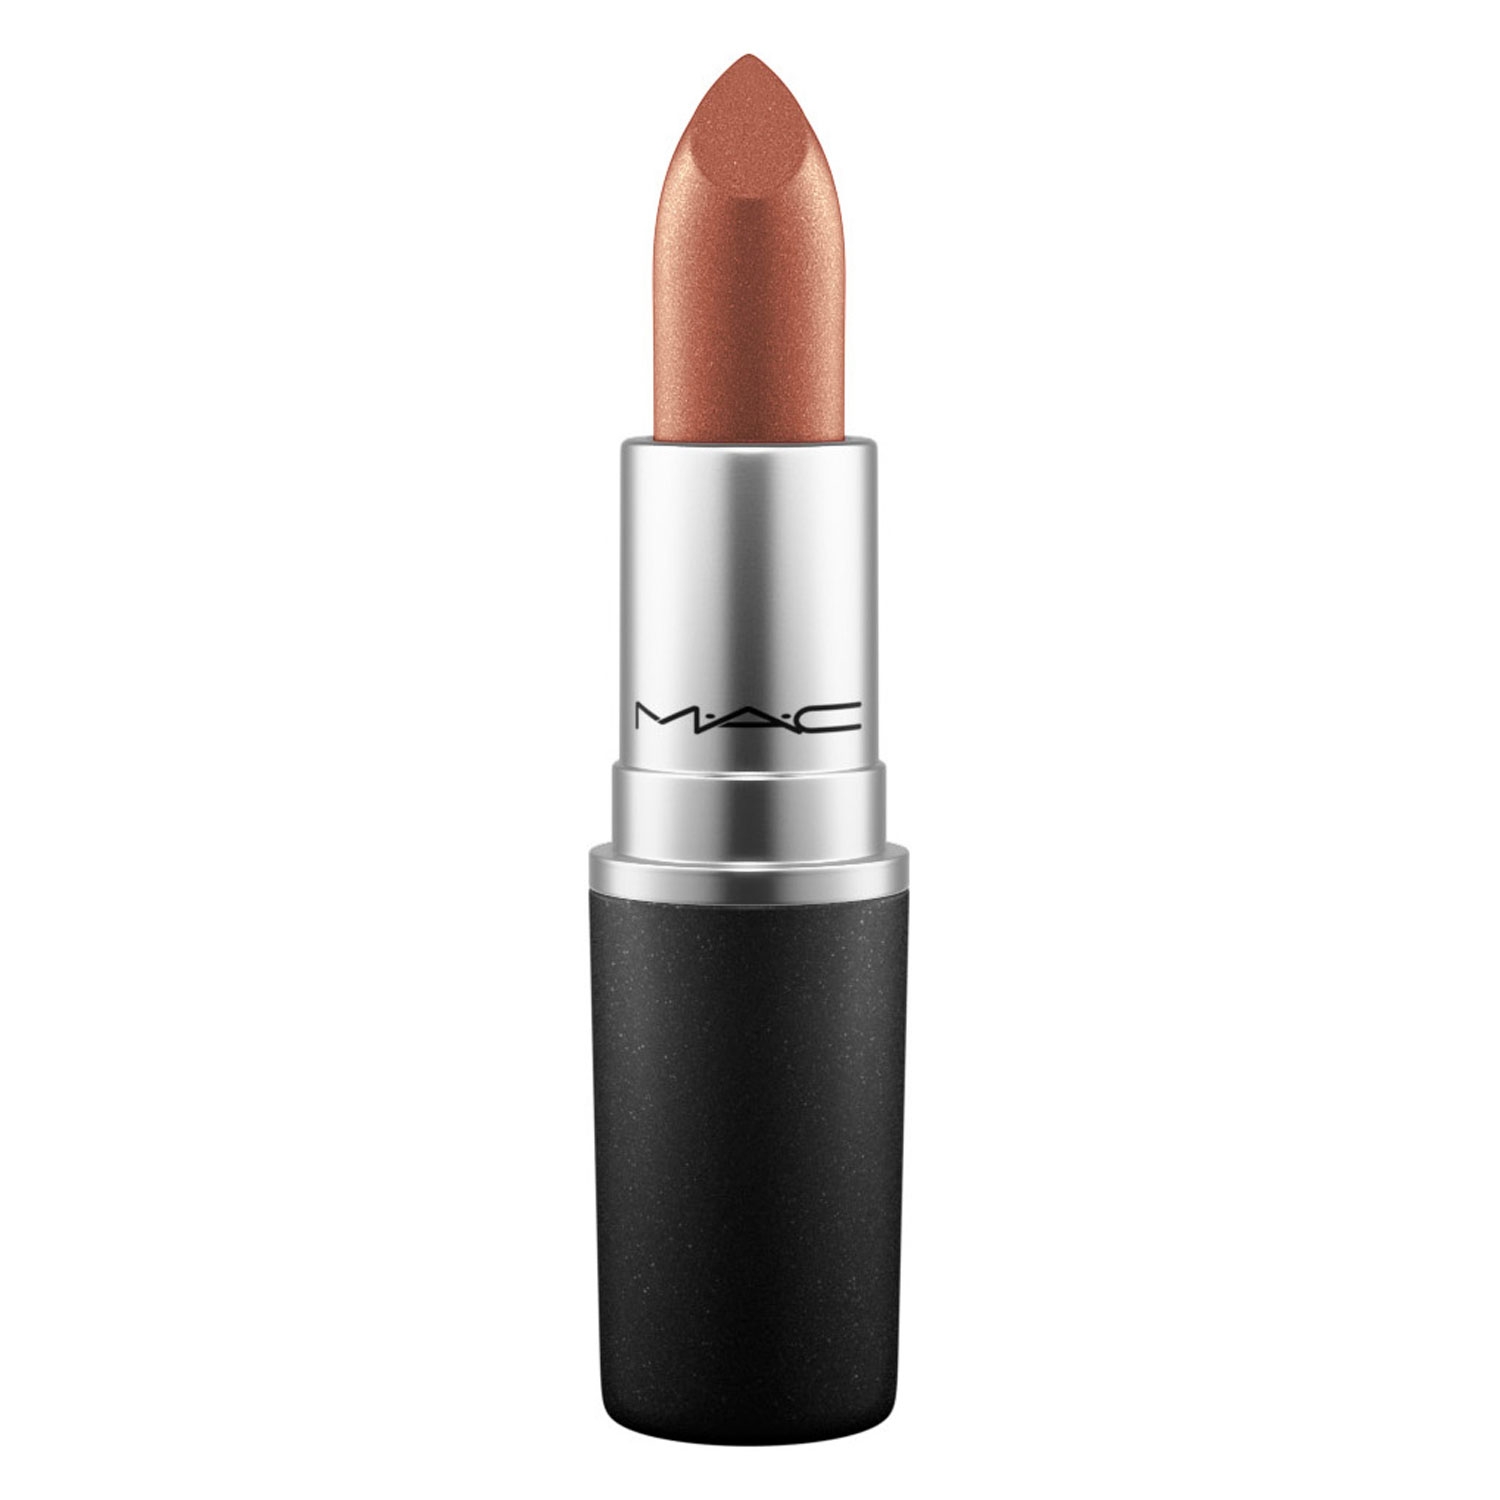 Product image from Frost Lipstick - "O"